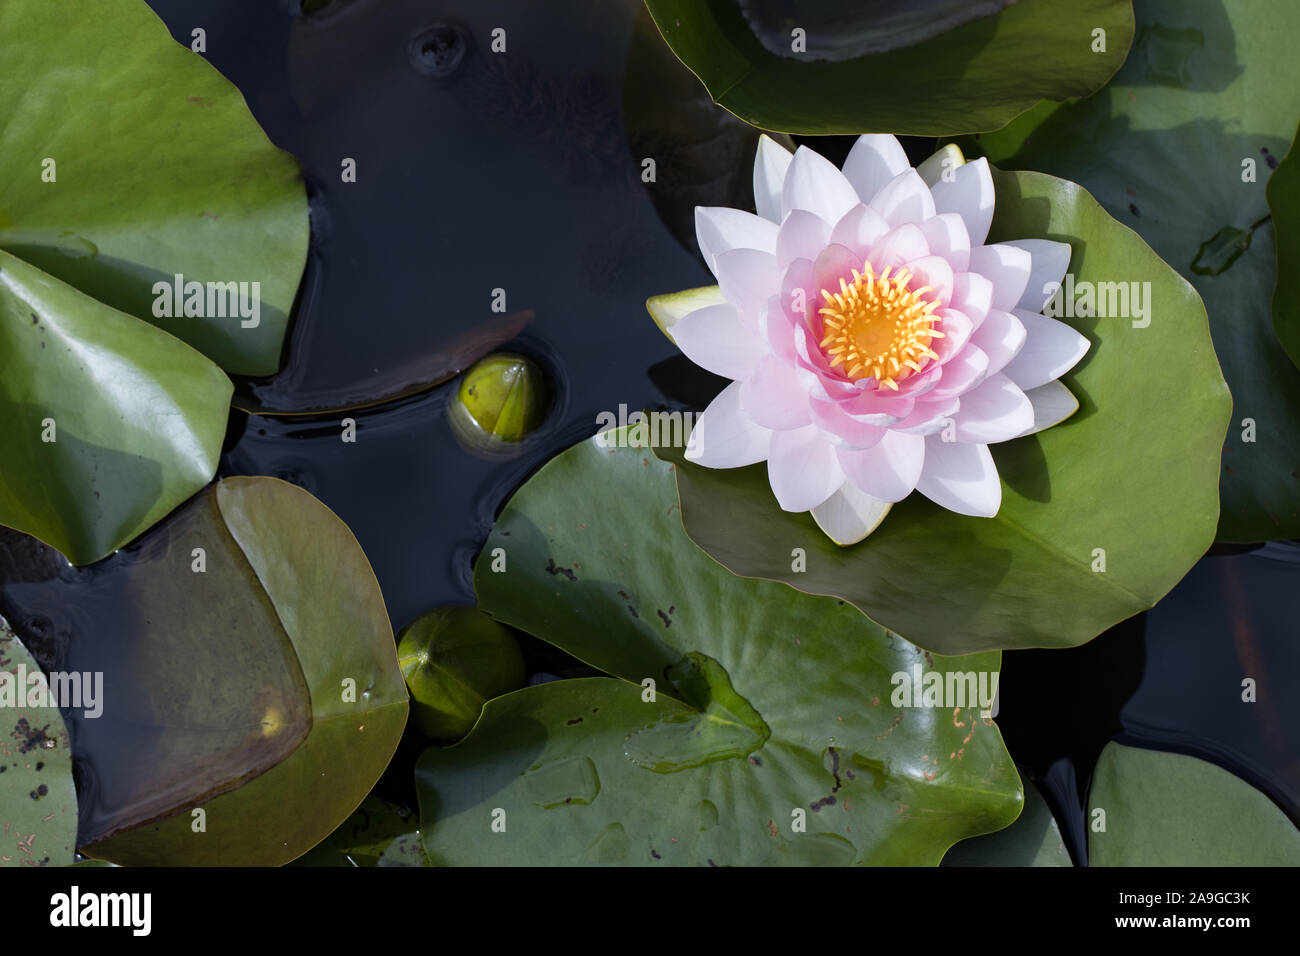 top view / birds eyes view of a pink blooming water lily (Nymphaea) in a pond Stock Photo